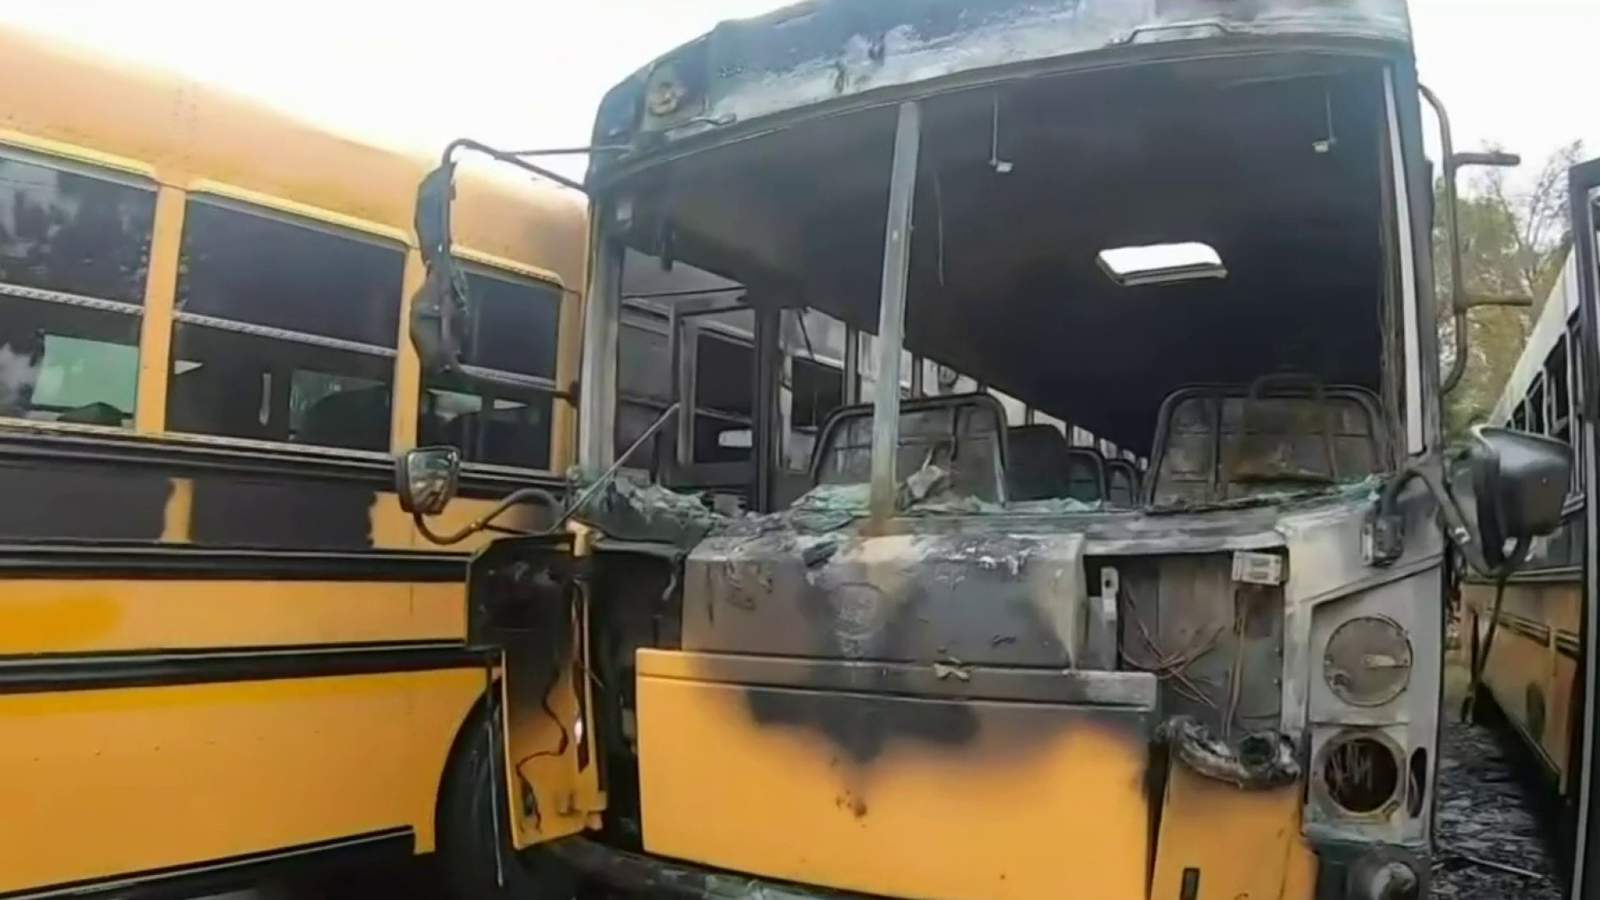 Police investigating fire that destroyed 4 Plymouth-Canton school buses